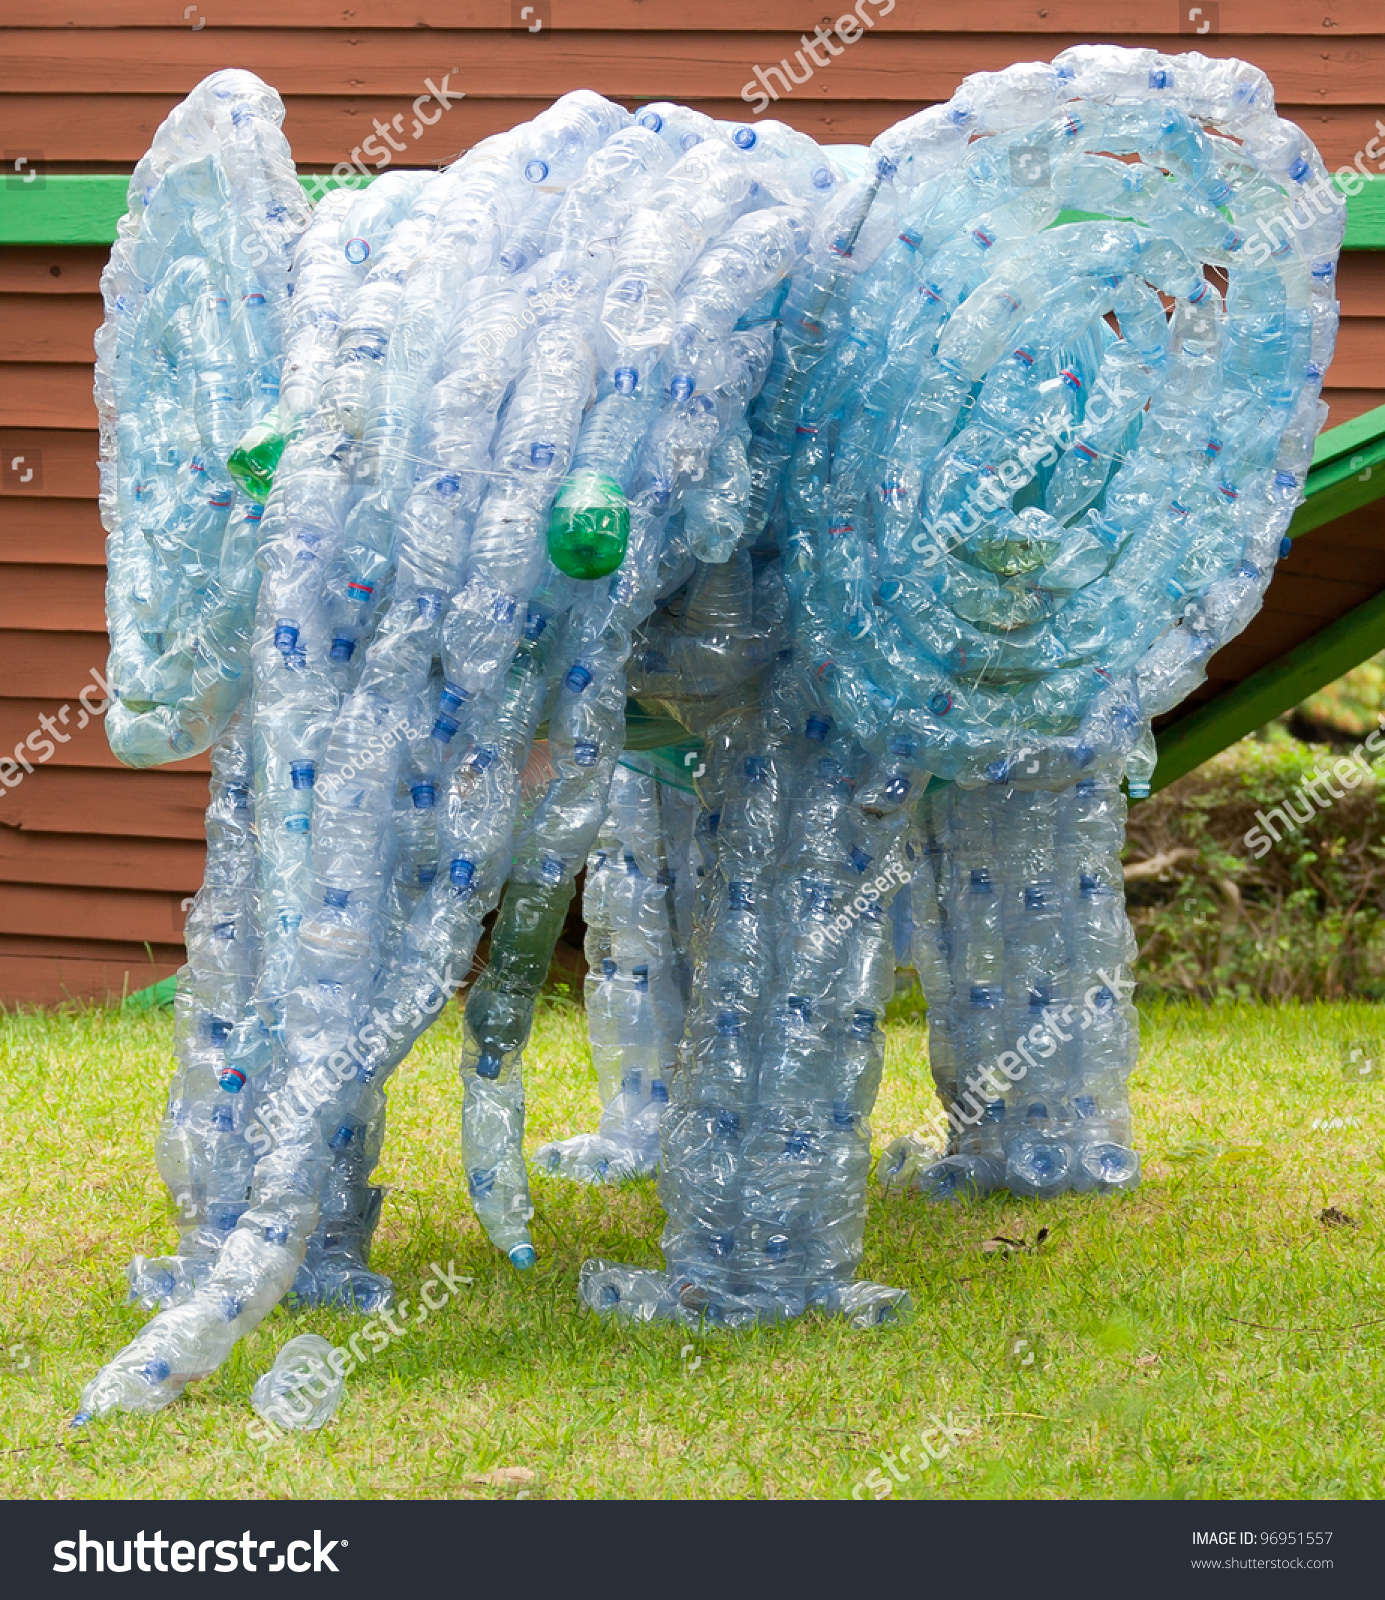 Elephant Made From Plastic Bottles. Concept Of How To Make Useful And Beautiful Things From ...